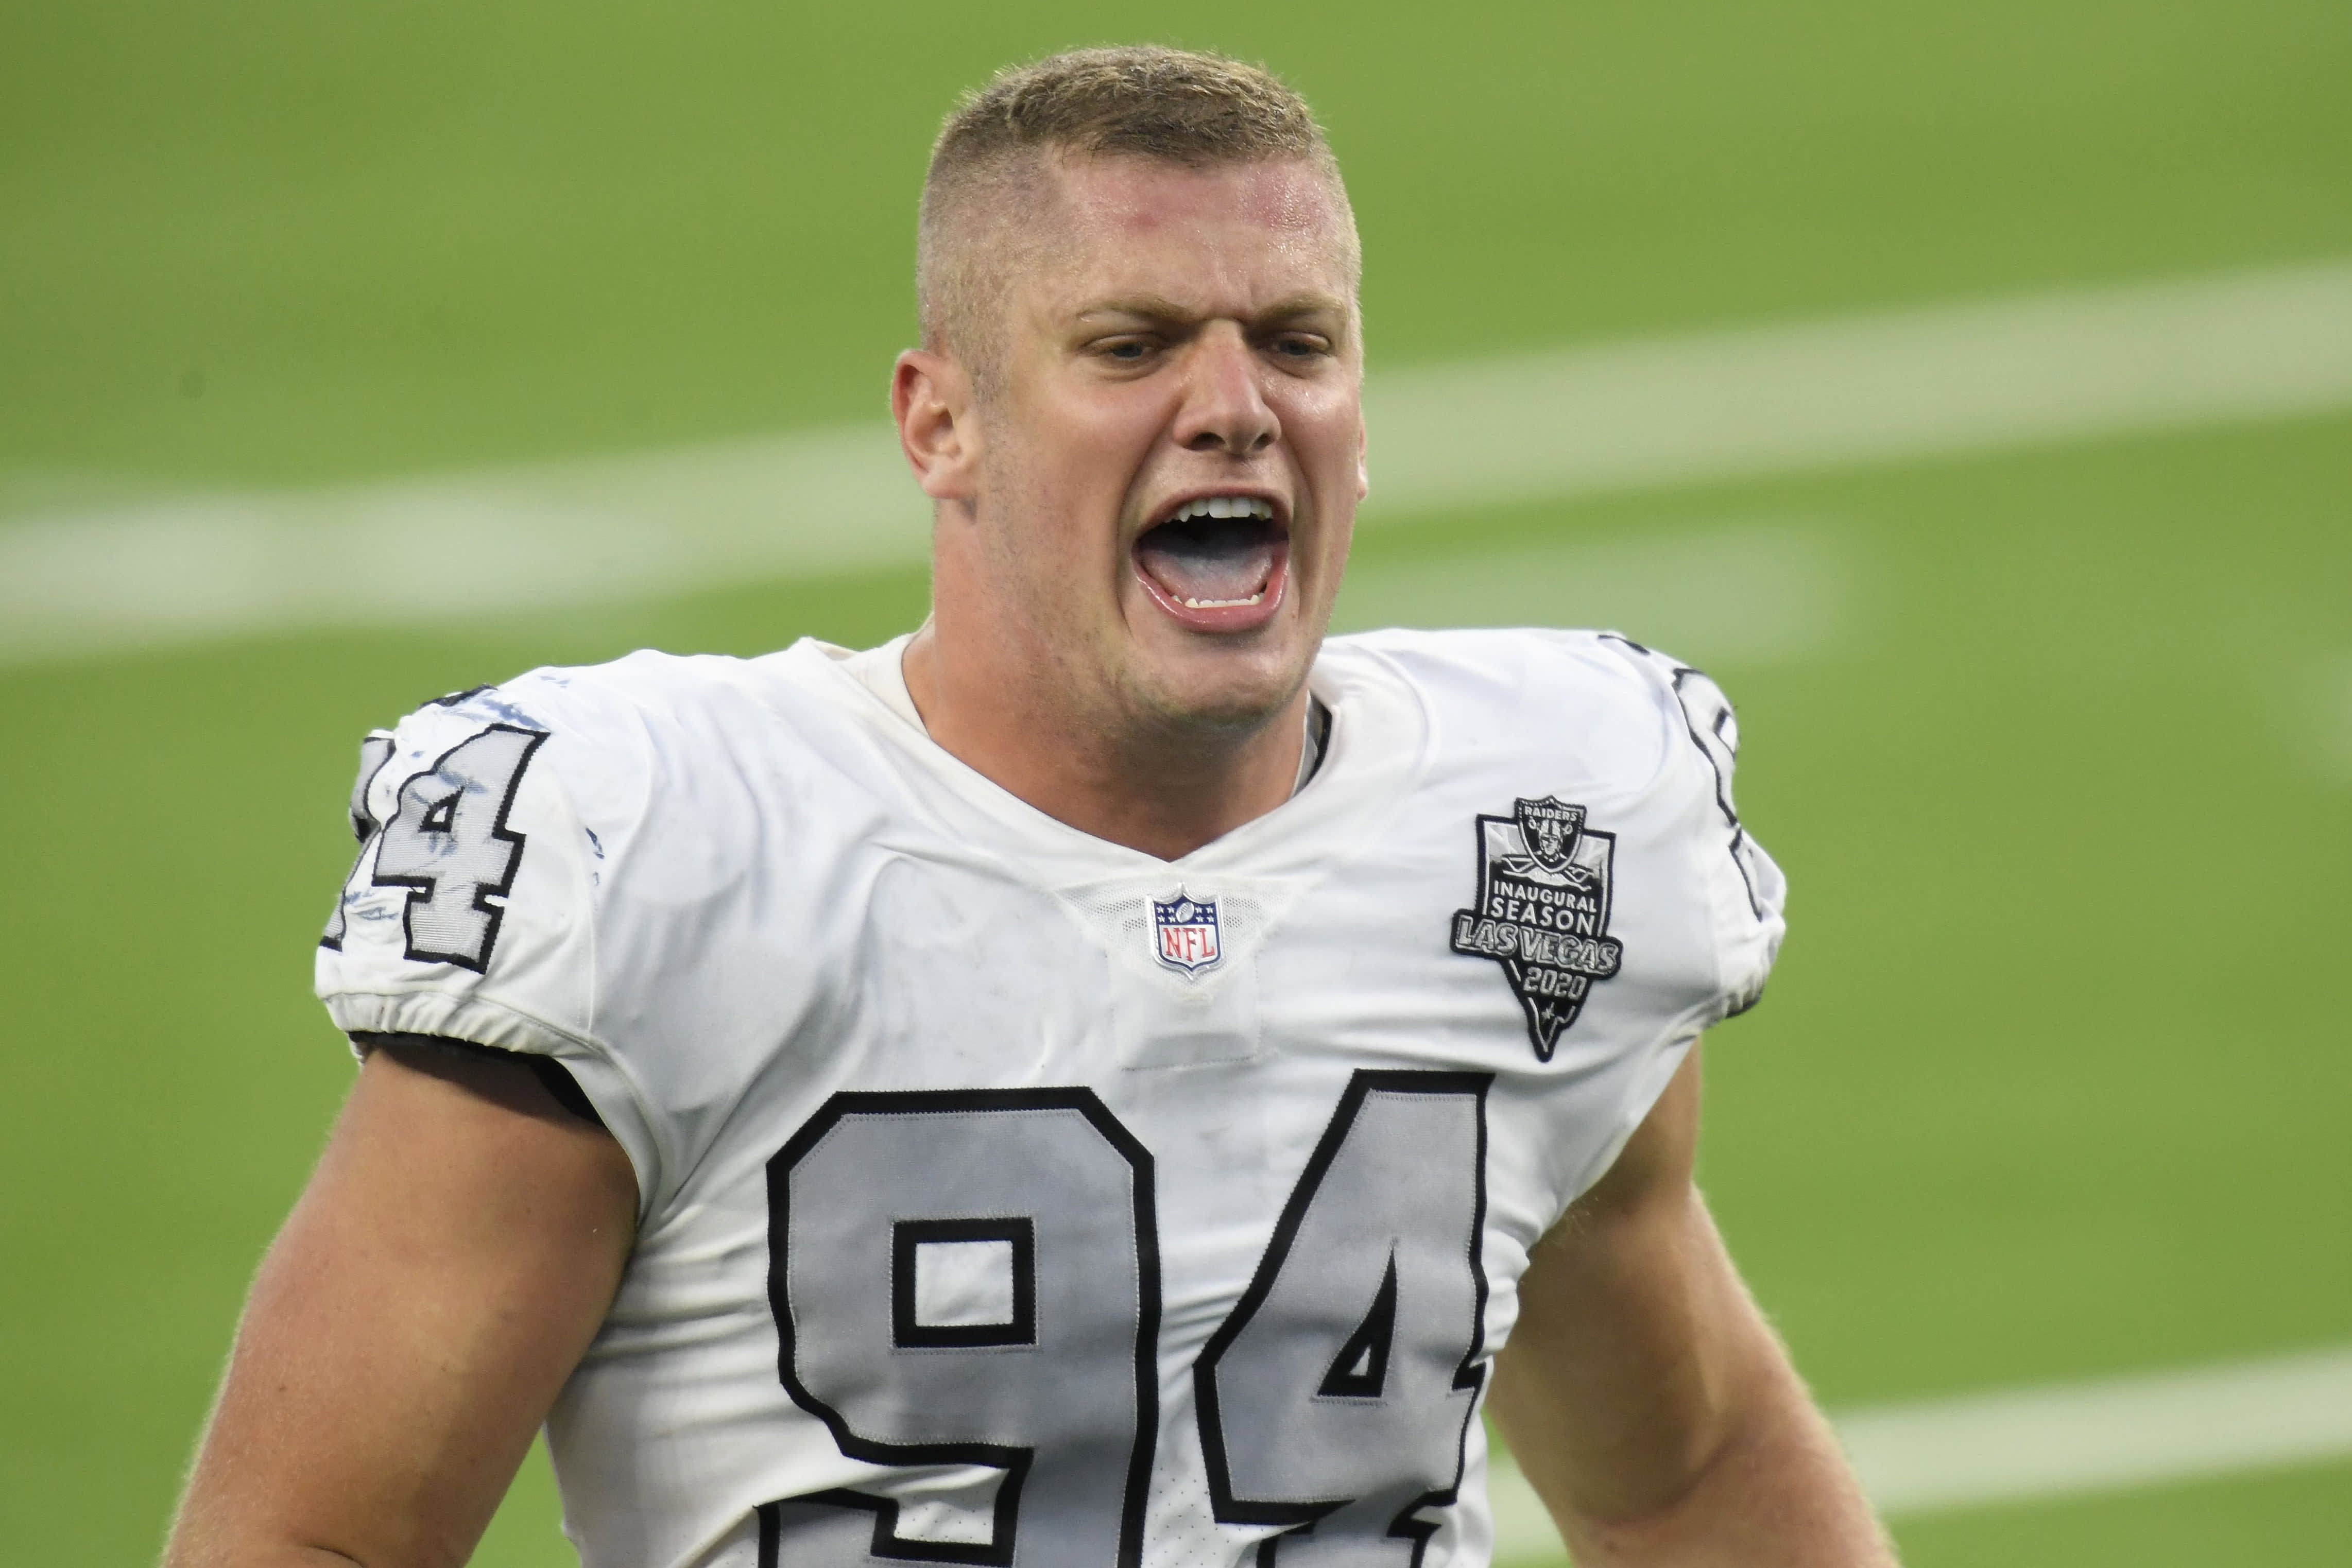 Carl Nassib comes out as gay, the first active NFL player to do so - Bitcoi...